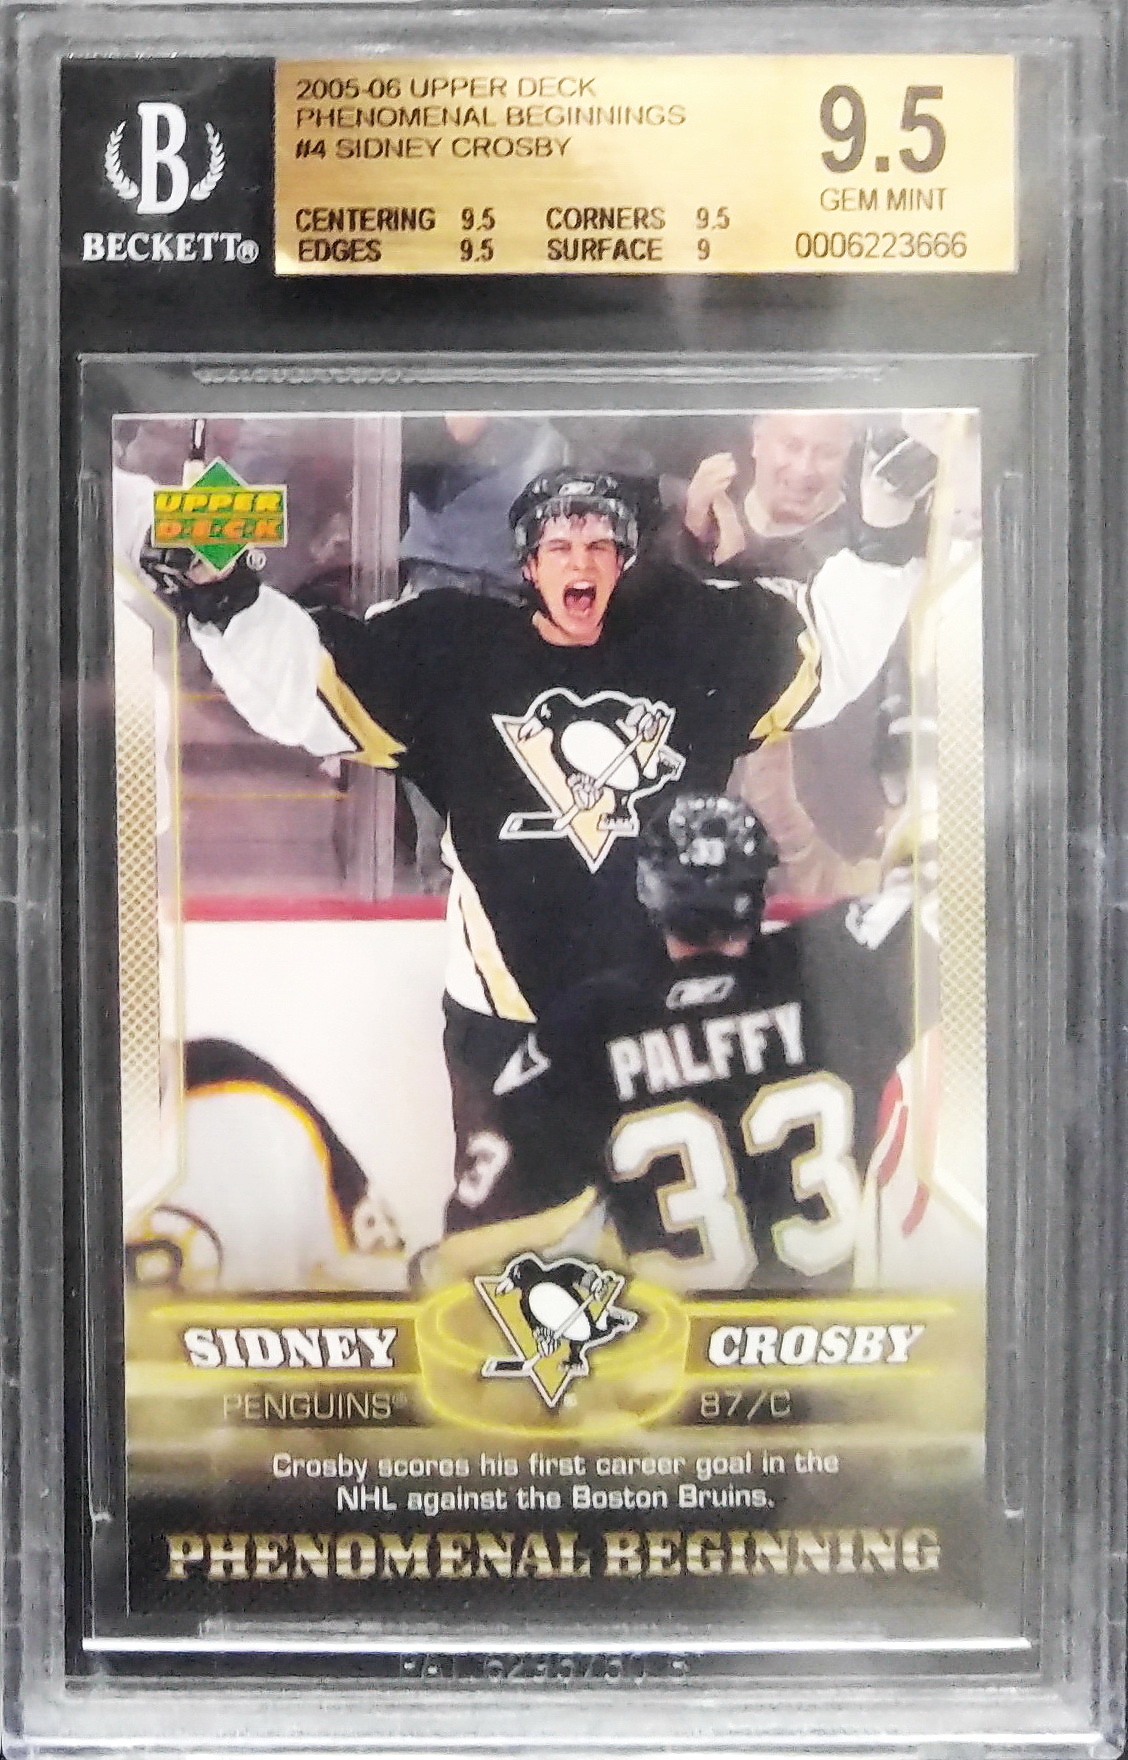 2005 Upper Deck Victory #285 Sidney Crosby Pittsburgh Penguins Rookie Card  Mint